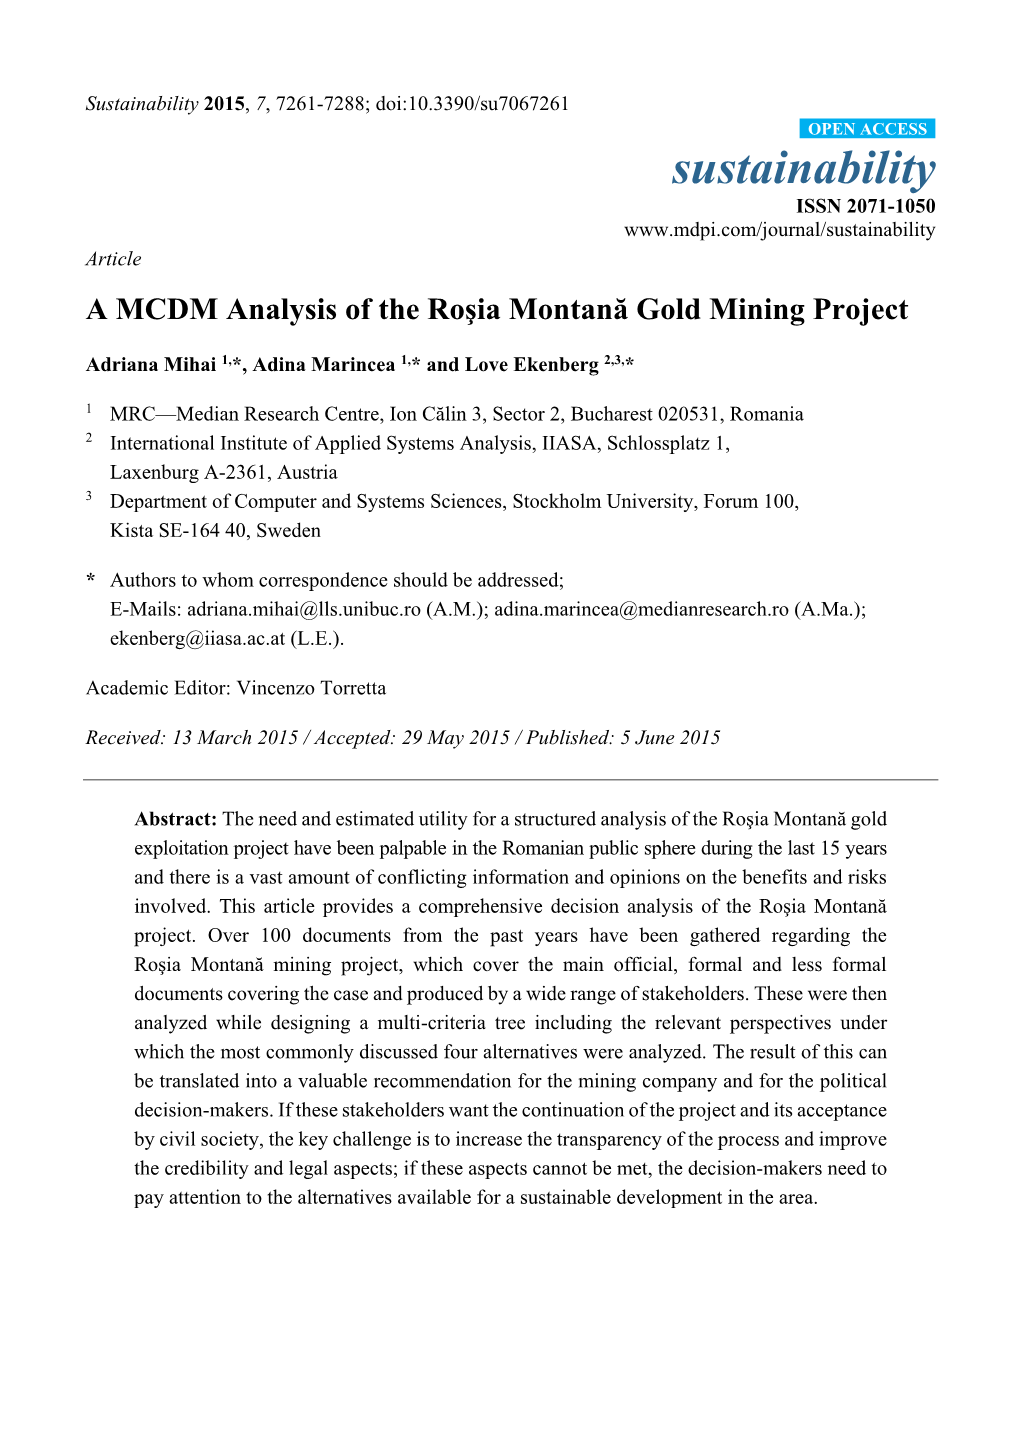 A MCDM Analysis of the Roşia Montană Gold Mining Project